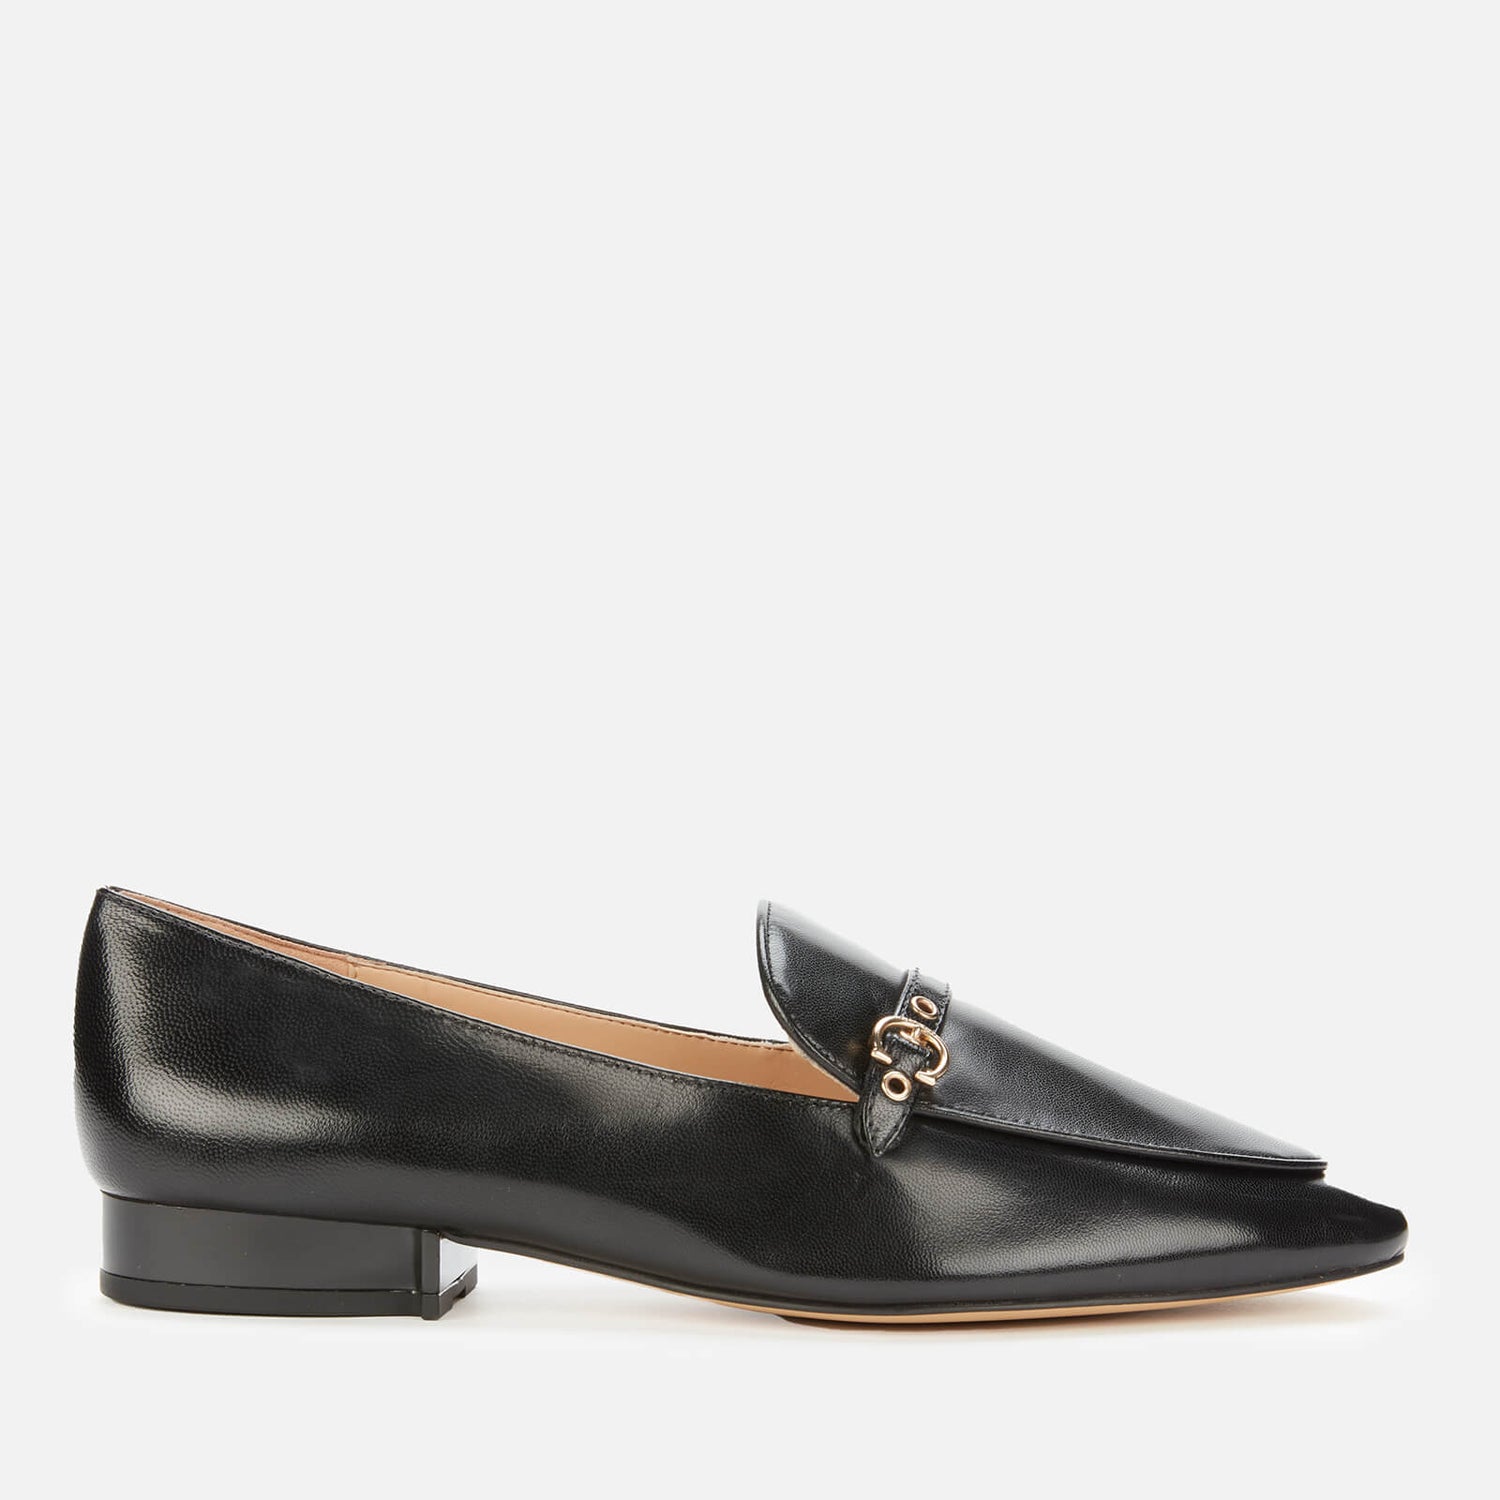 Coach Women's Isabel Leather Loafers - Black - UK 3